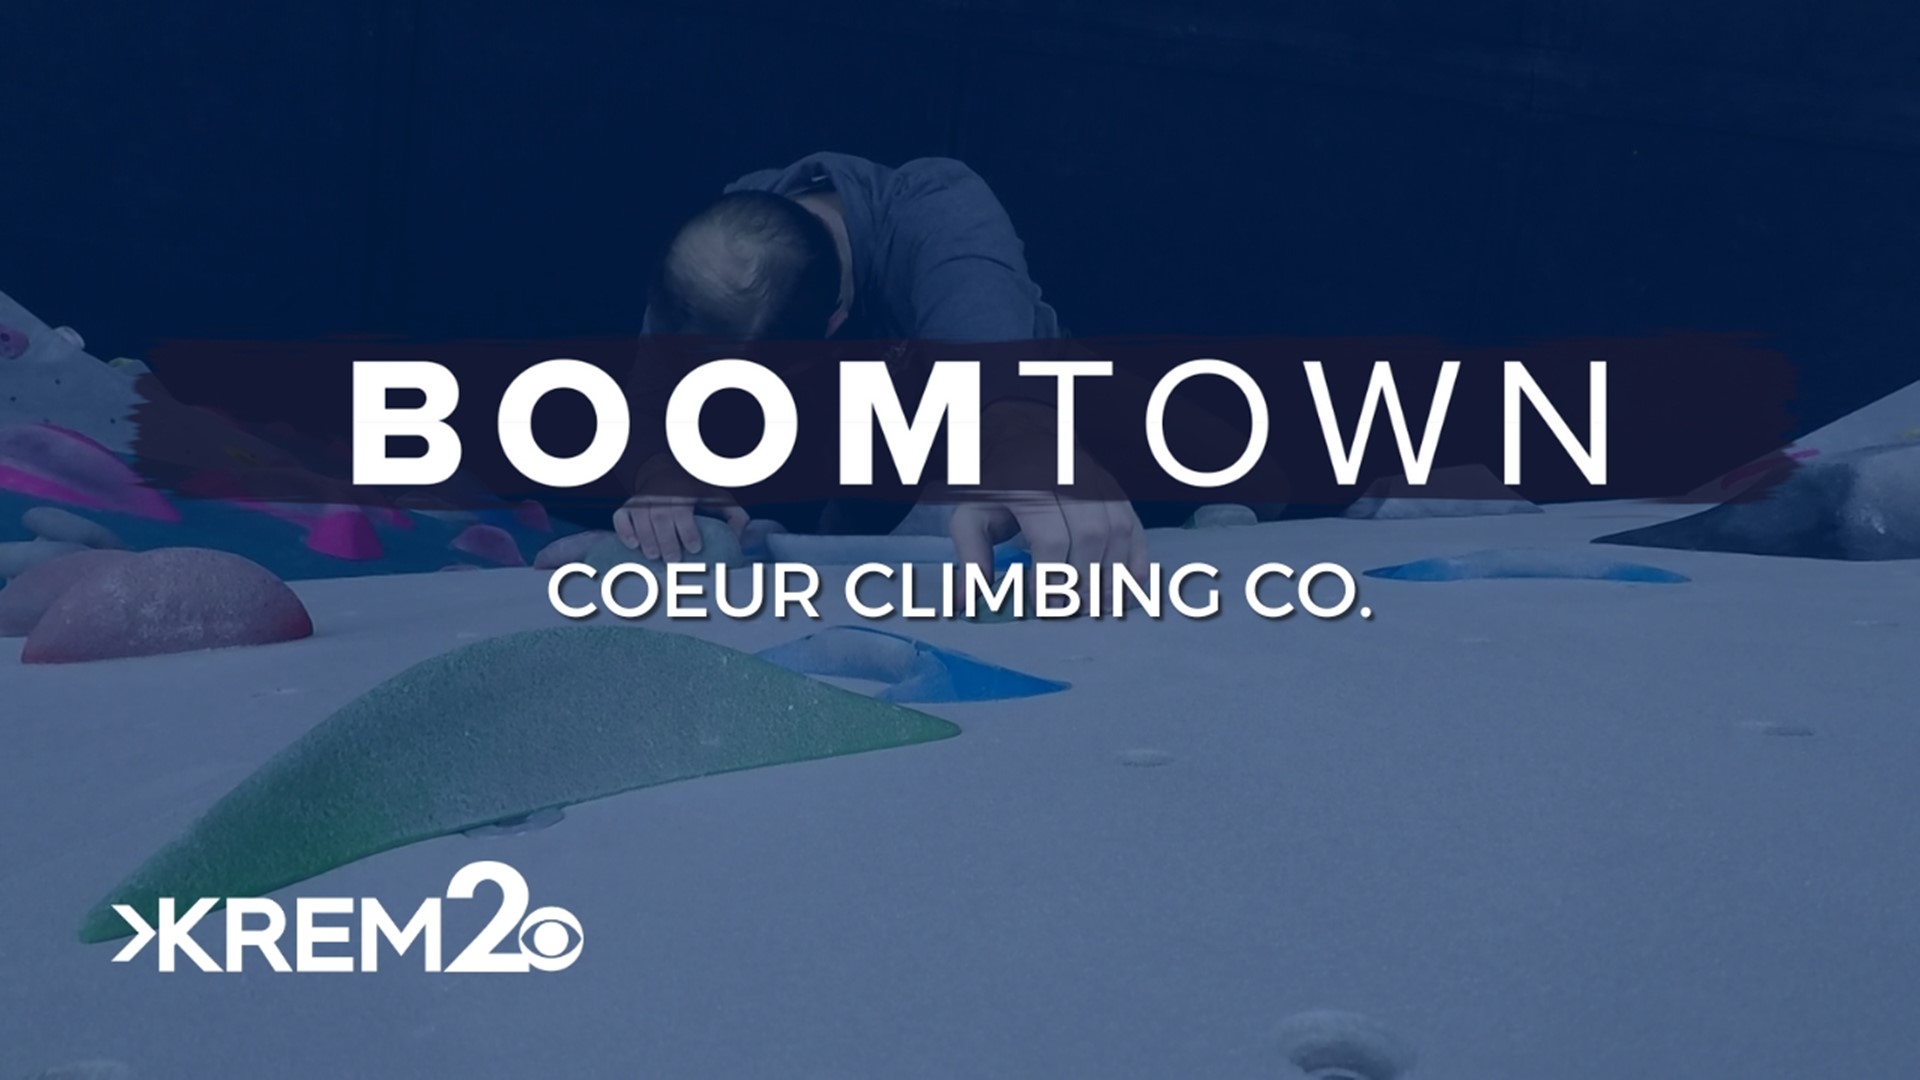 As part of our Boomtown series, KREM 2's Jeremy LaGoo took a look at a brand new rock climbing gym in Post Falls that fought through the pandemic.